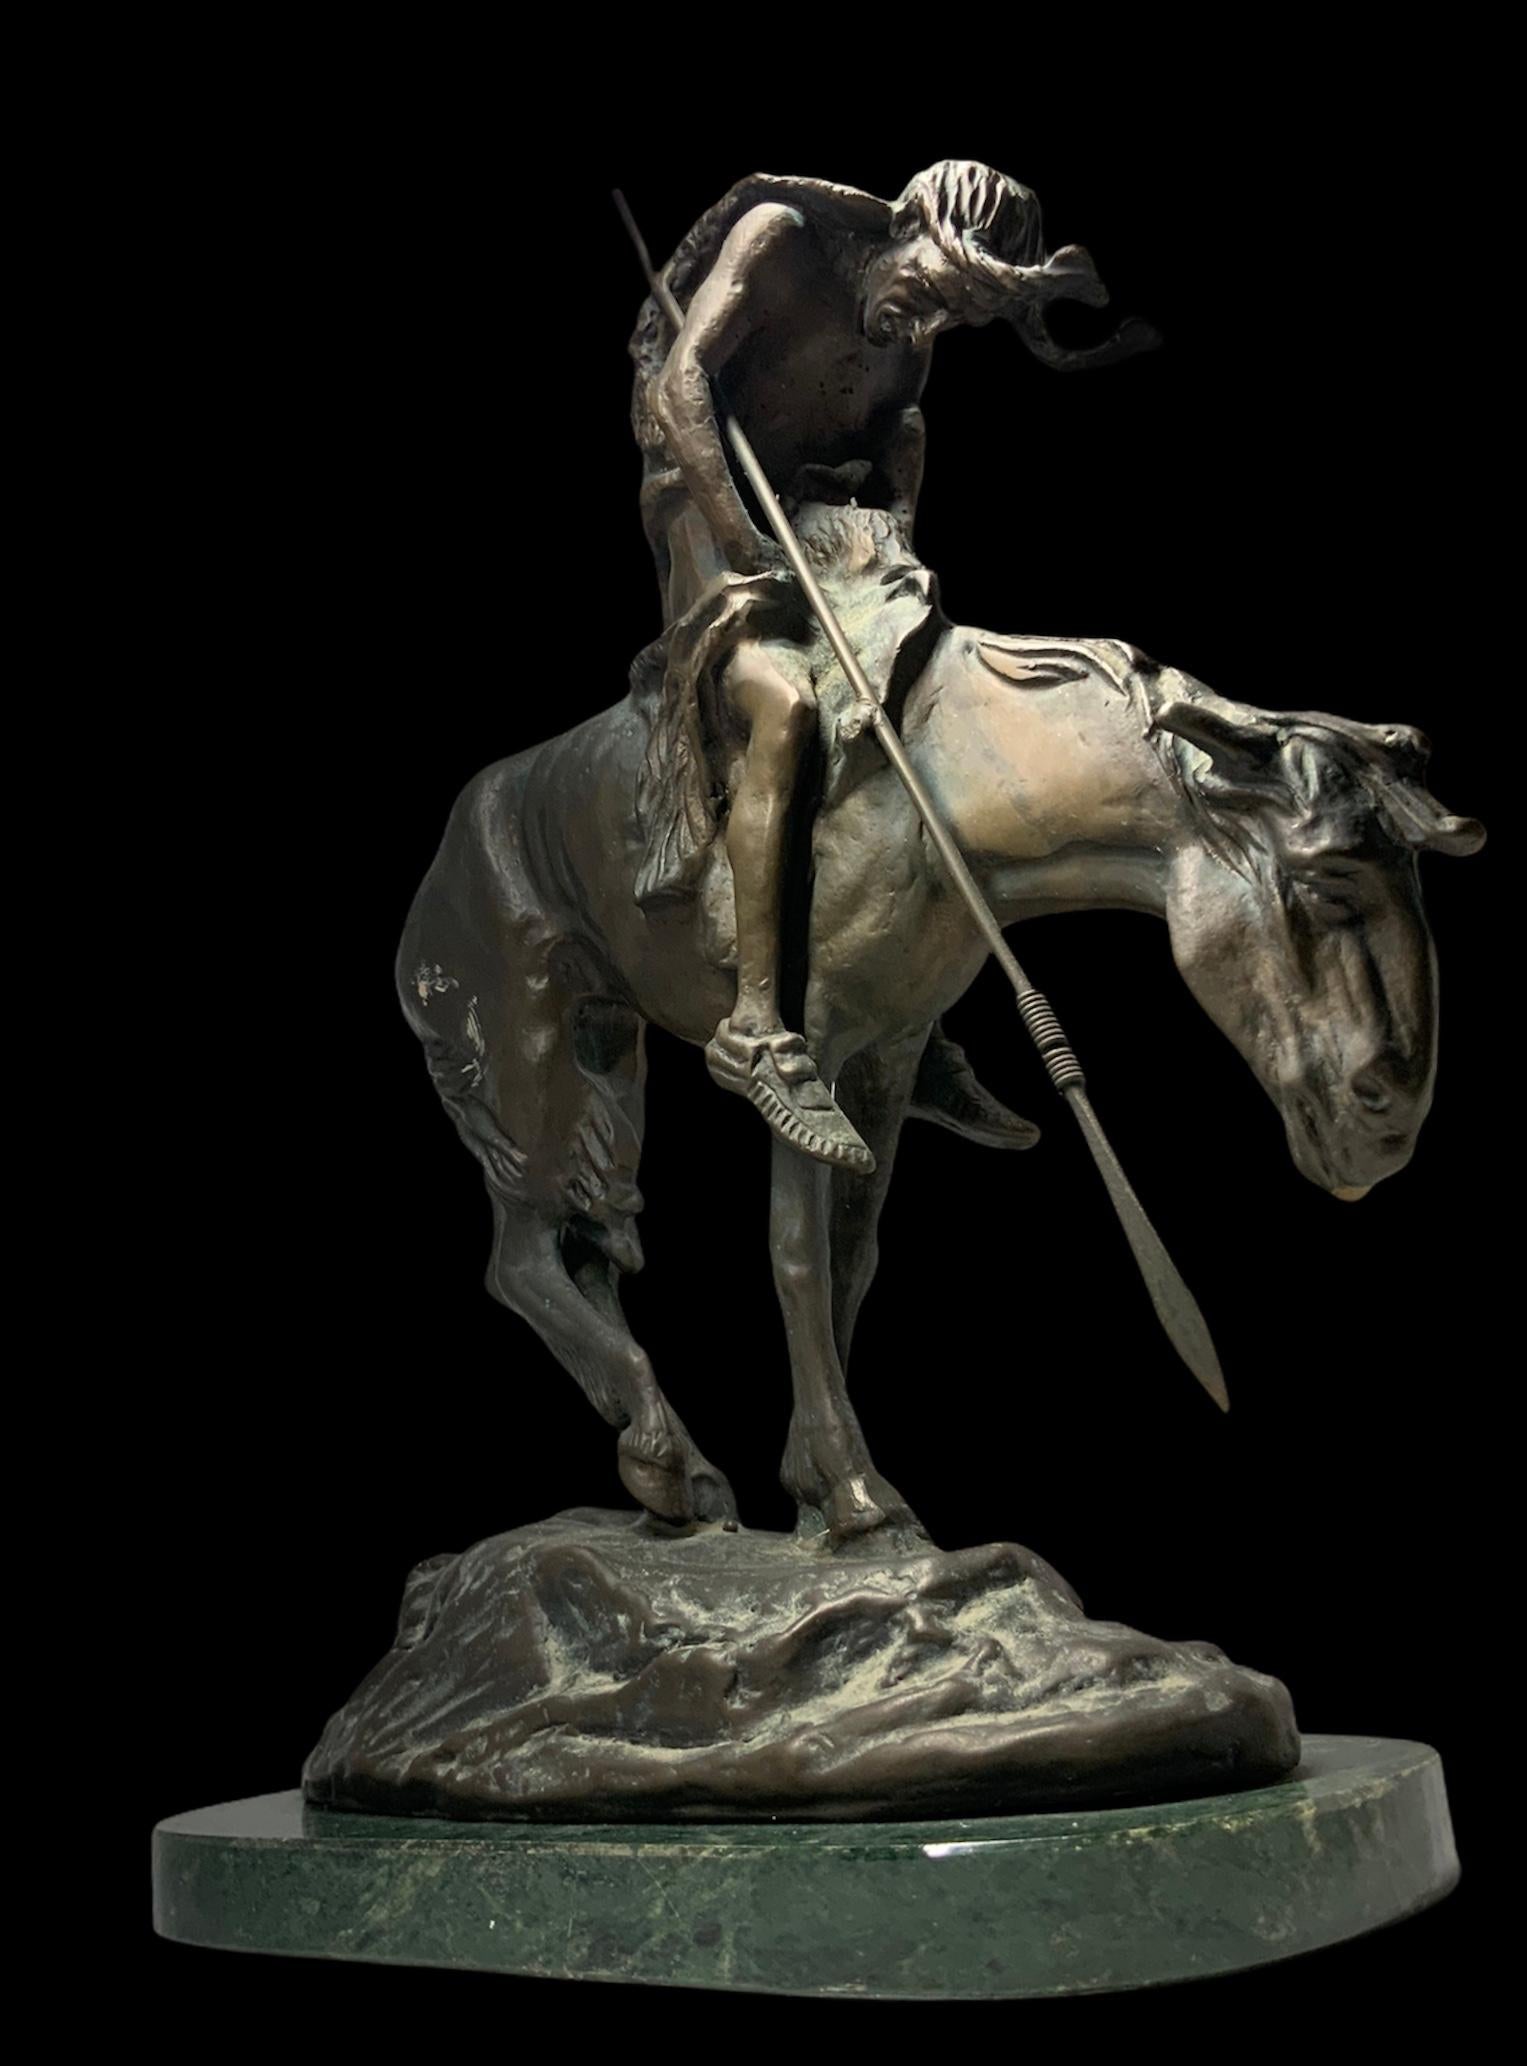 This a bronze sculpture after James Earle Fraser that is featuring an almost lifeless Native American who is riding a worn out horse while holding to his spear when they arrived to the Pacific Ocean border. You can see the well detailed features of